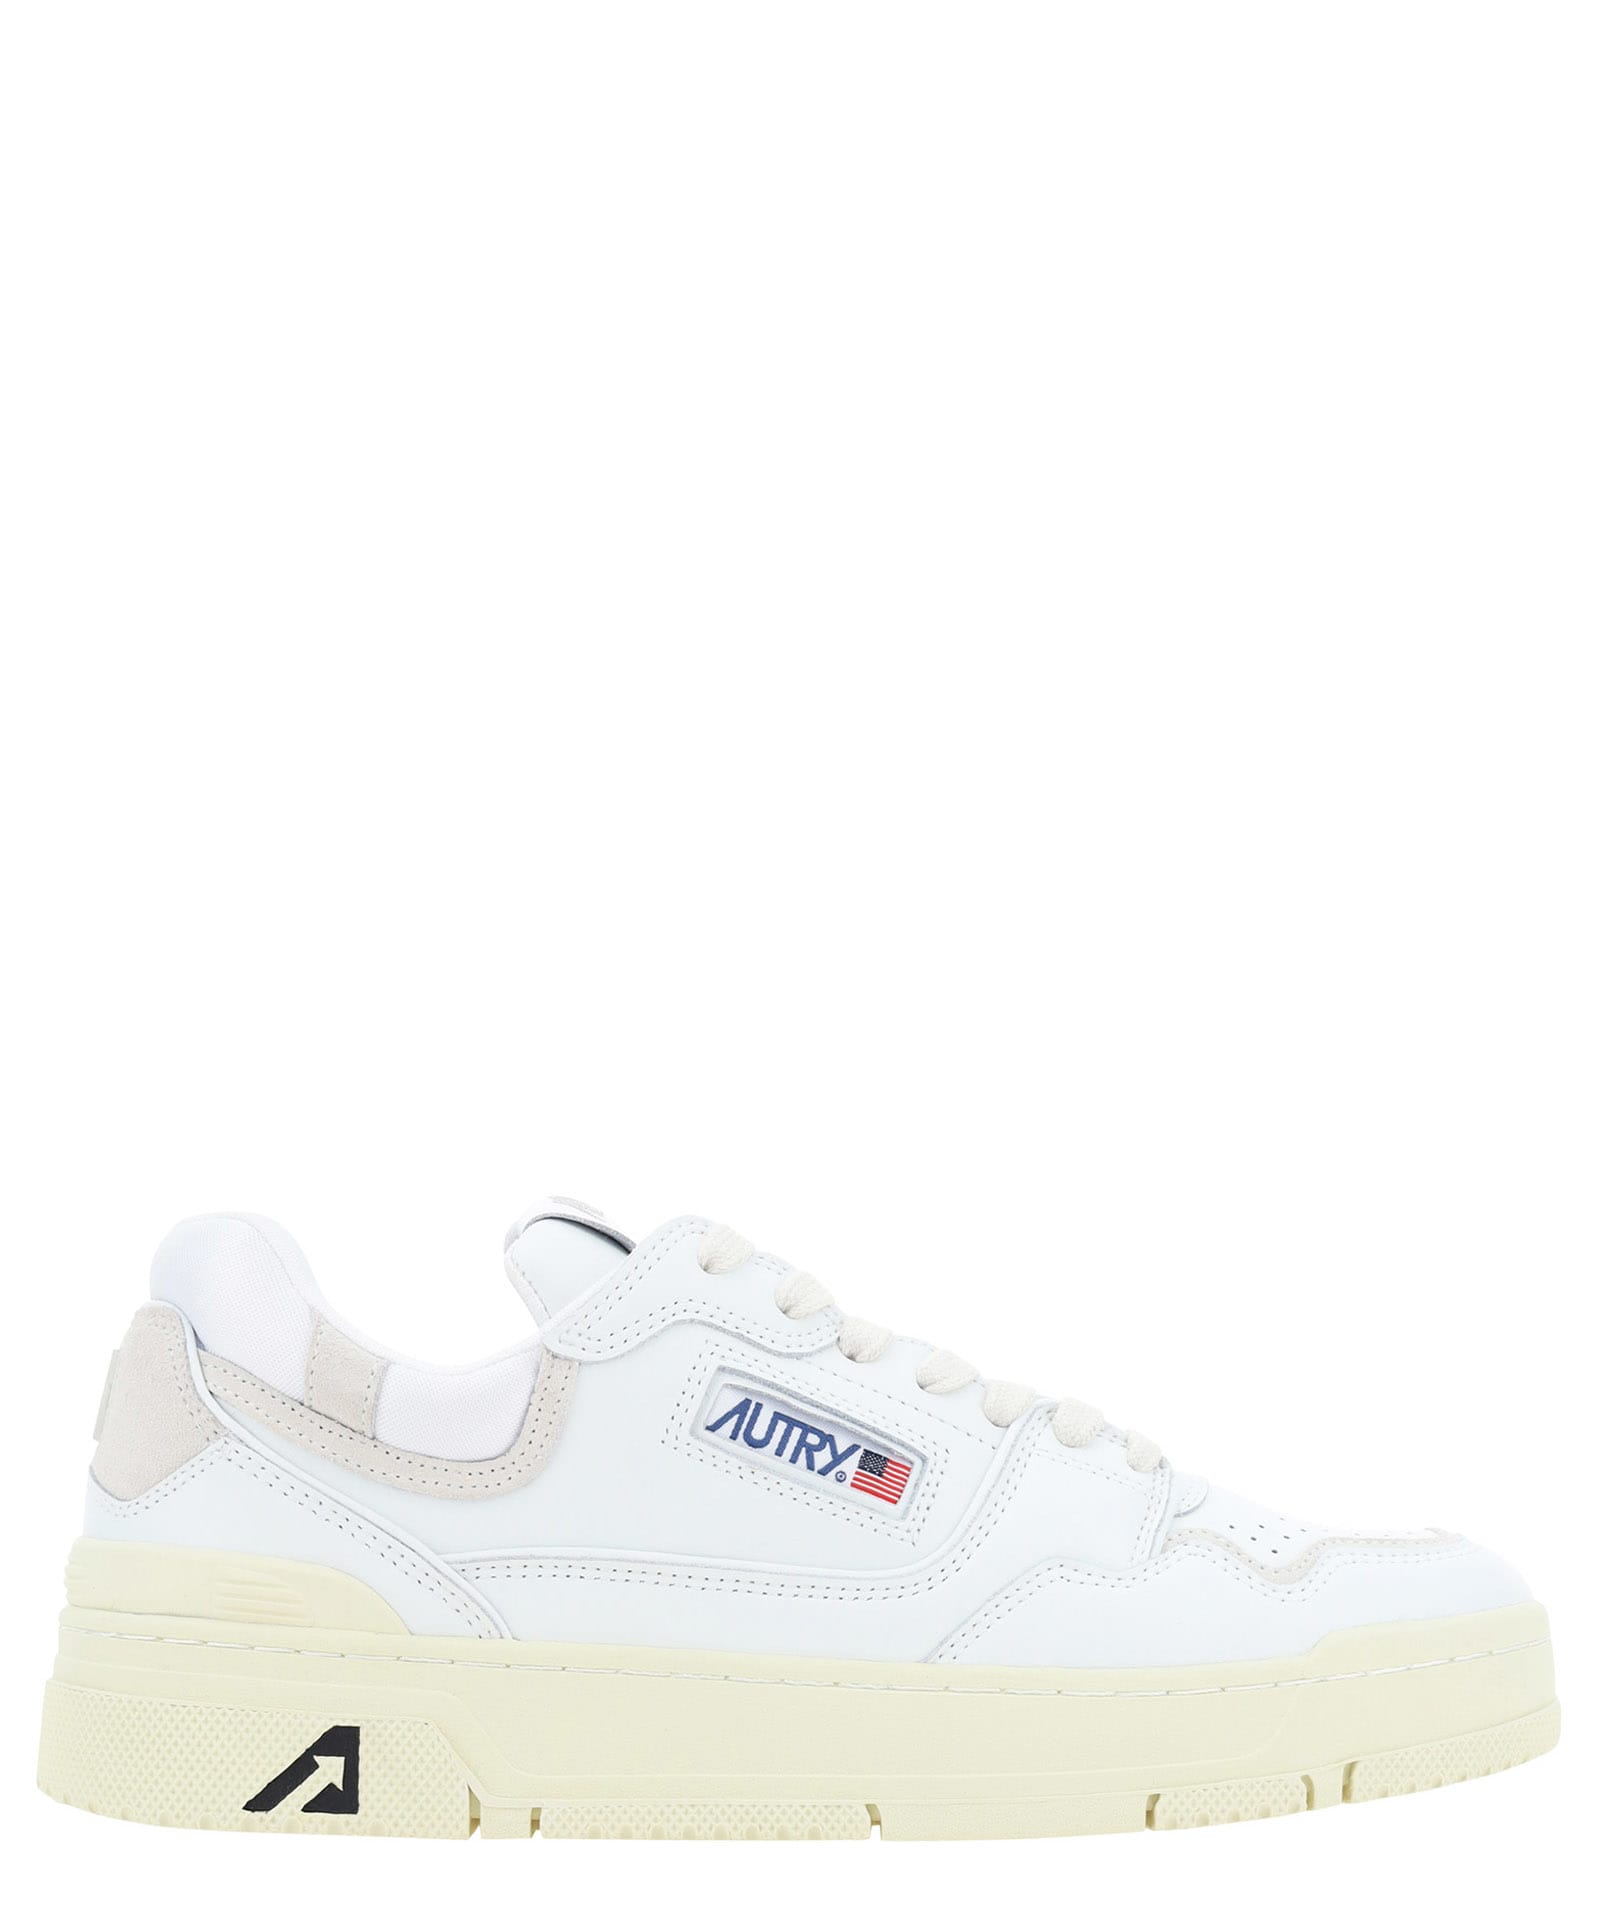 Shop Autry Clc Low Leather Sneakers In White